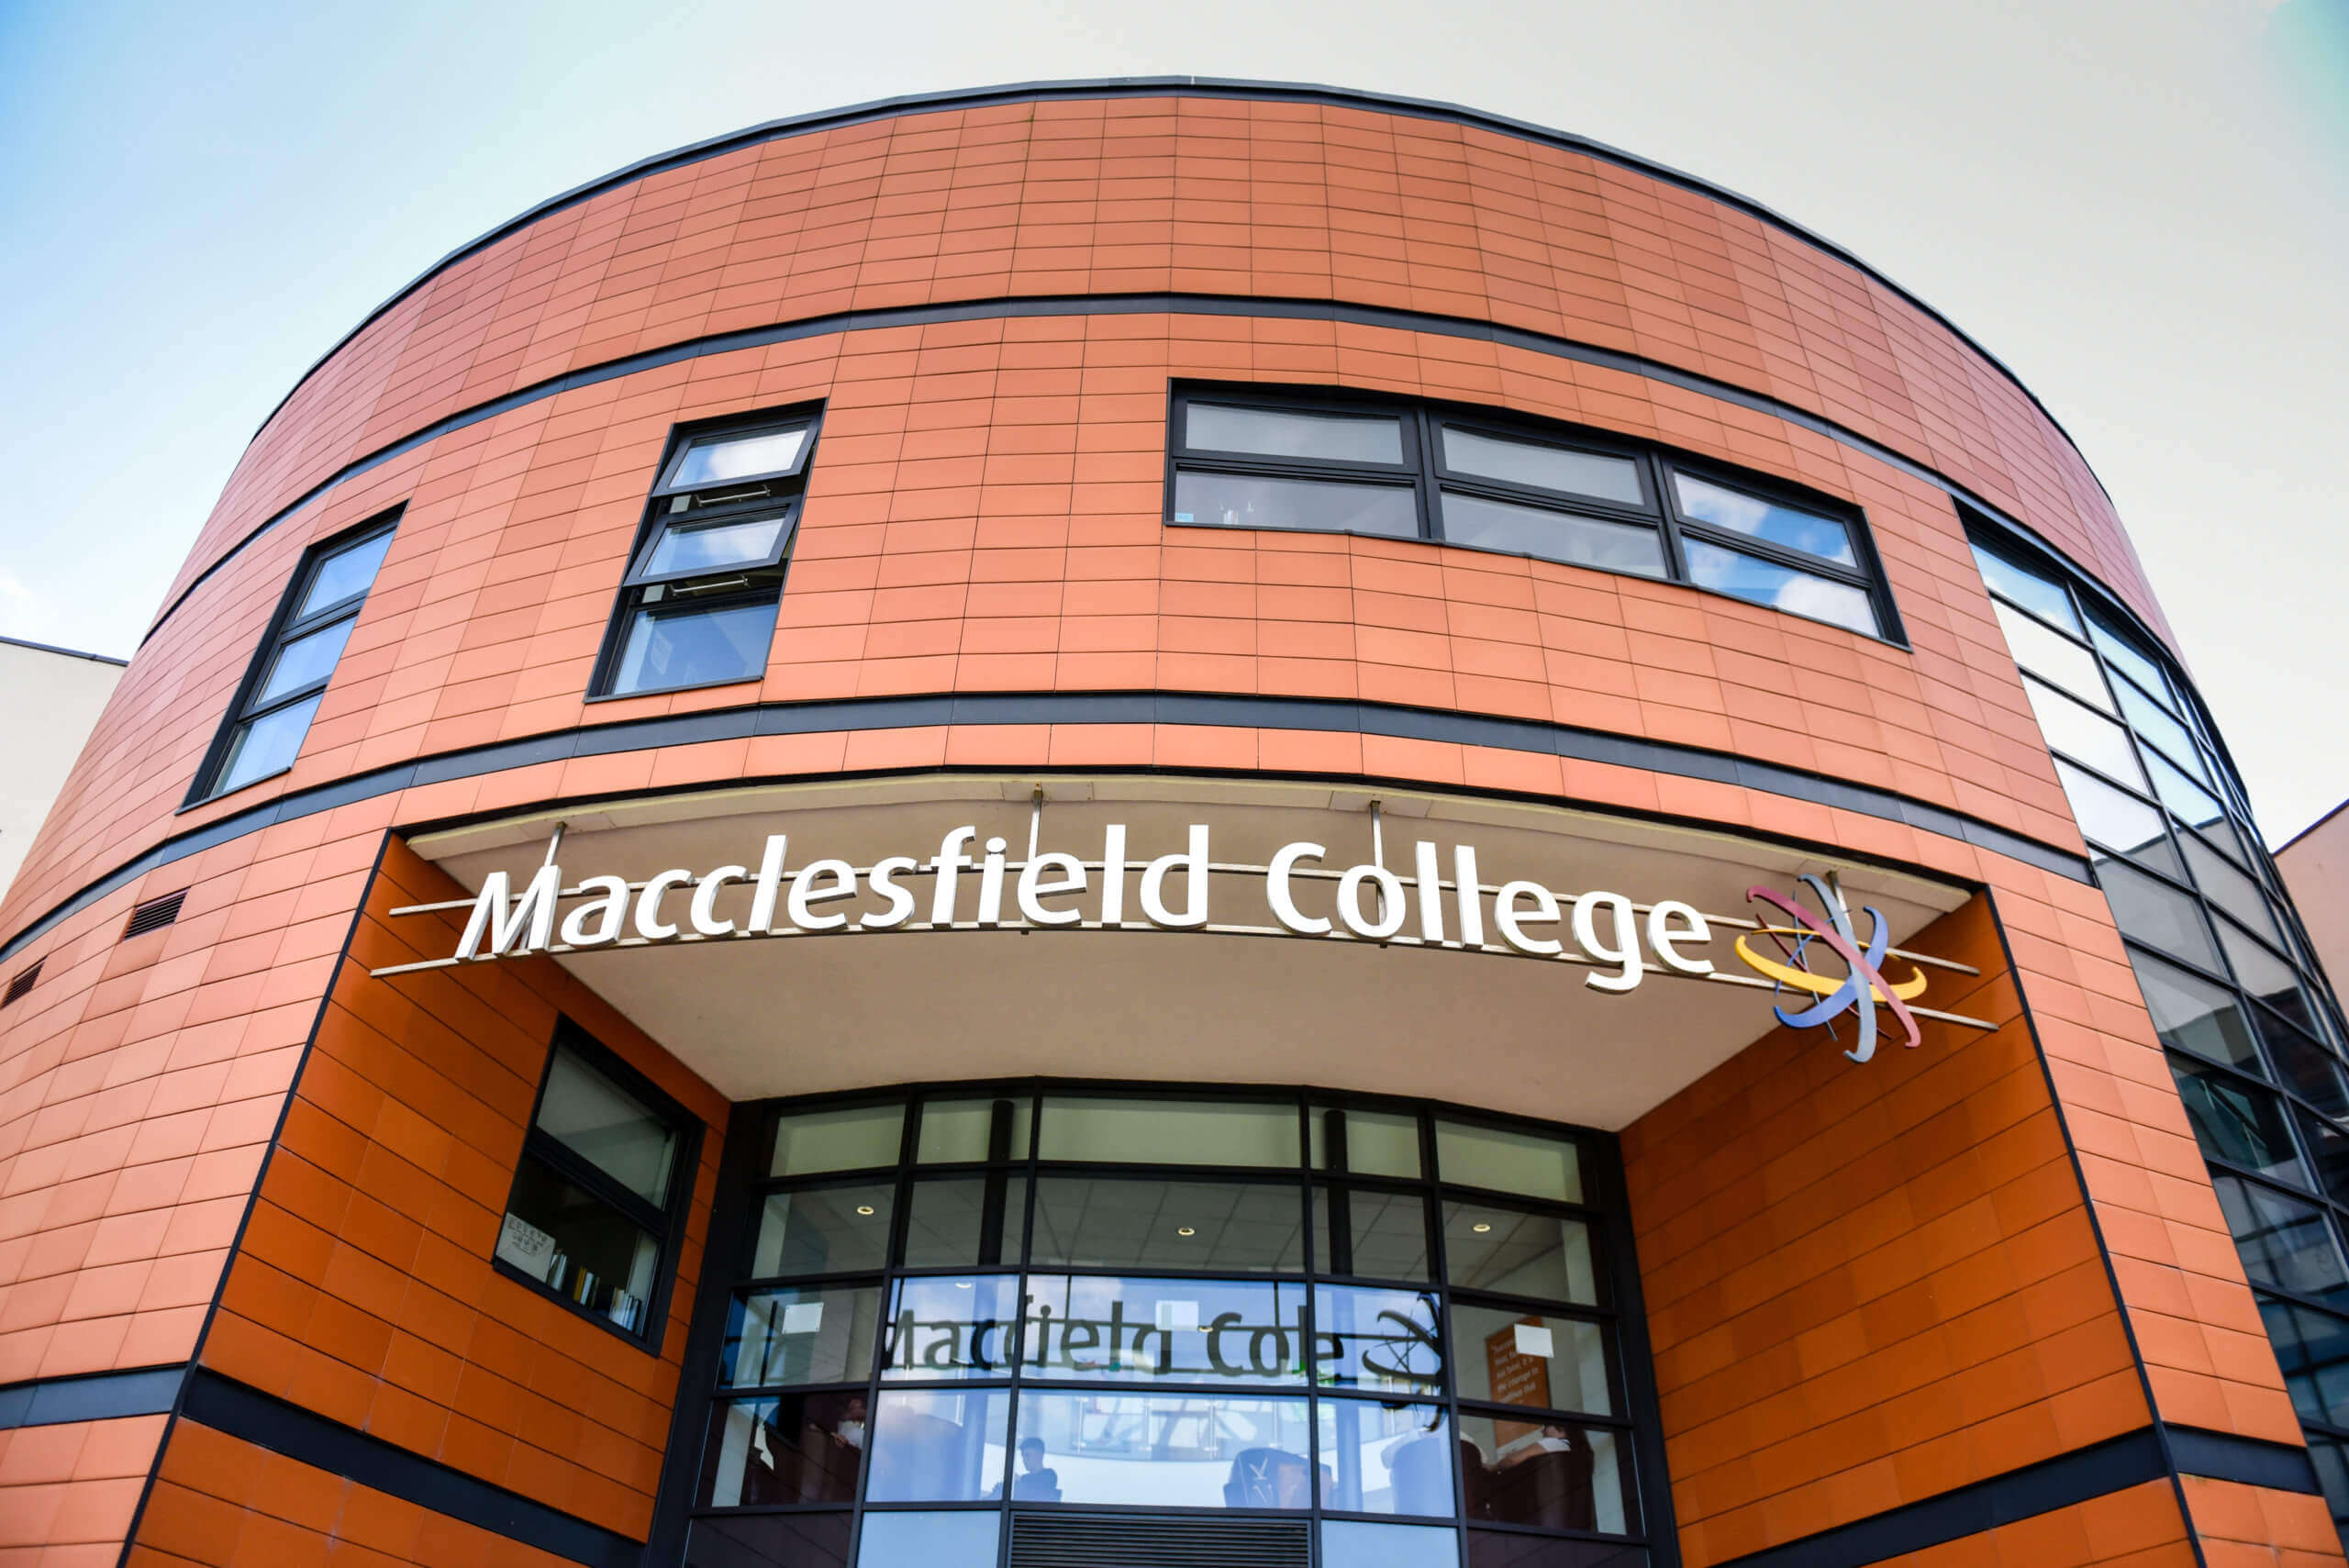 Close up of Macclesfield College entrance